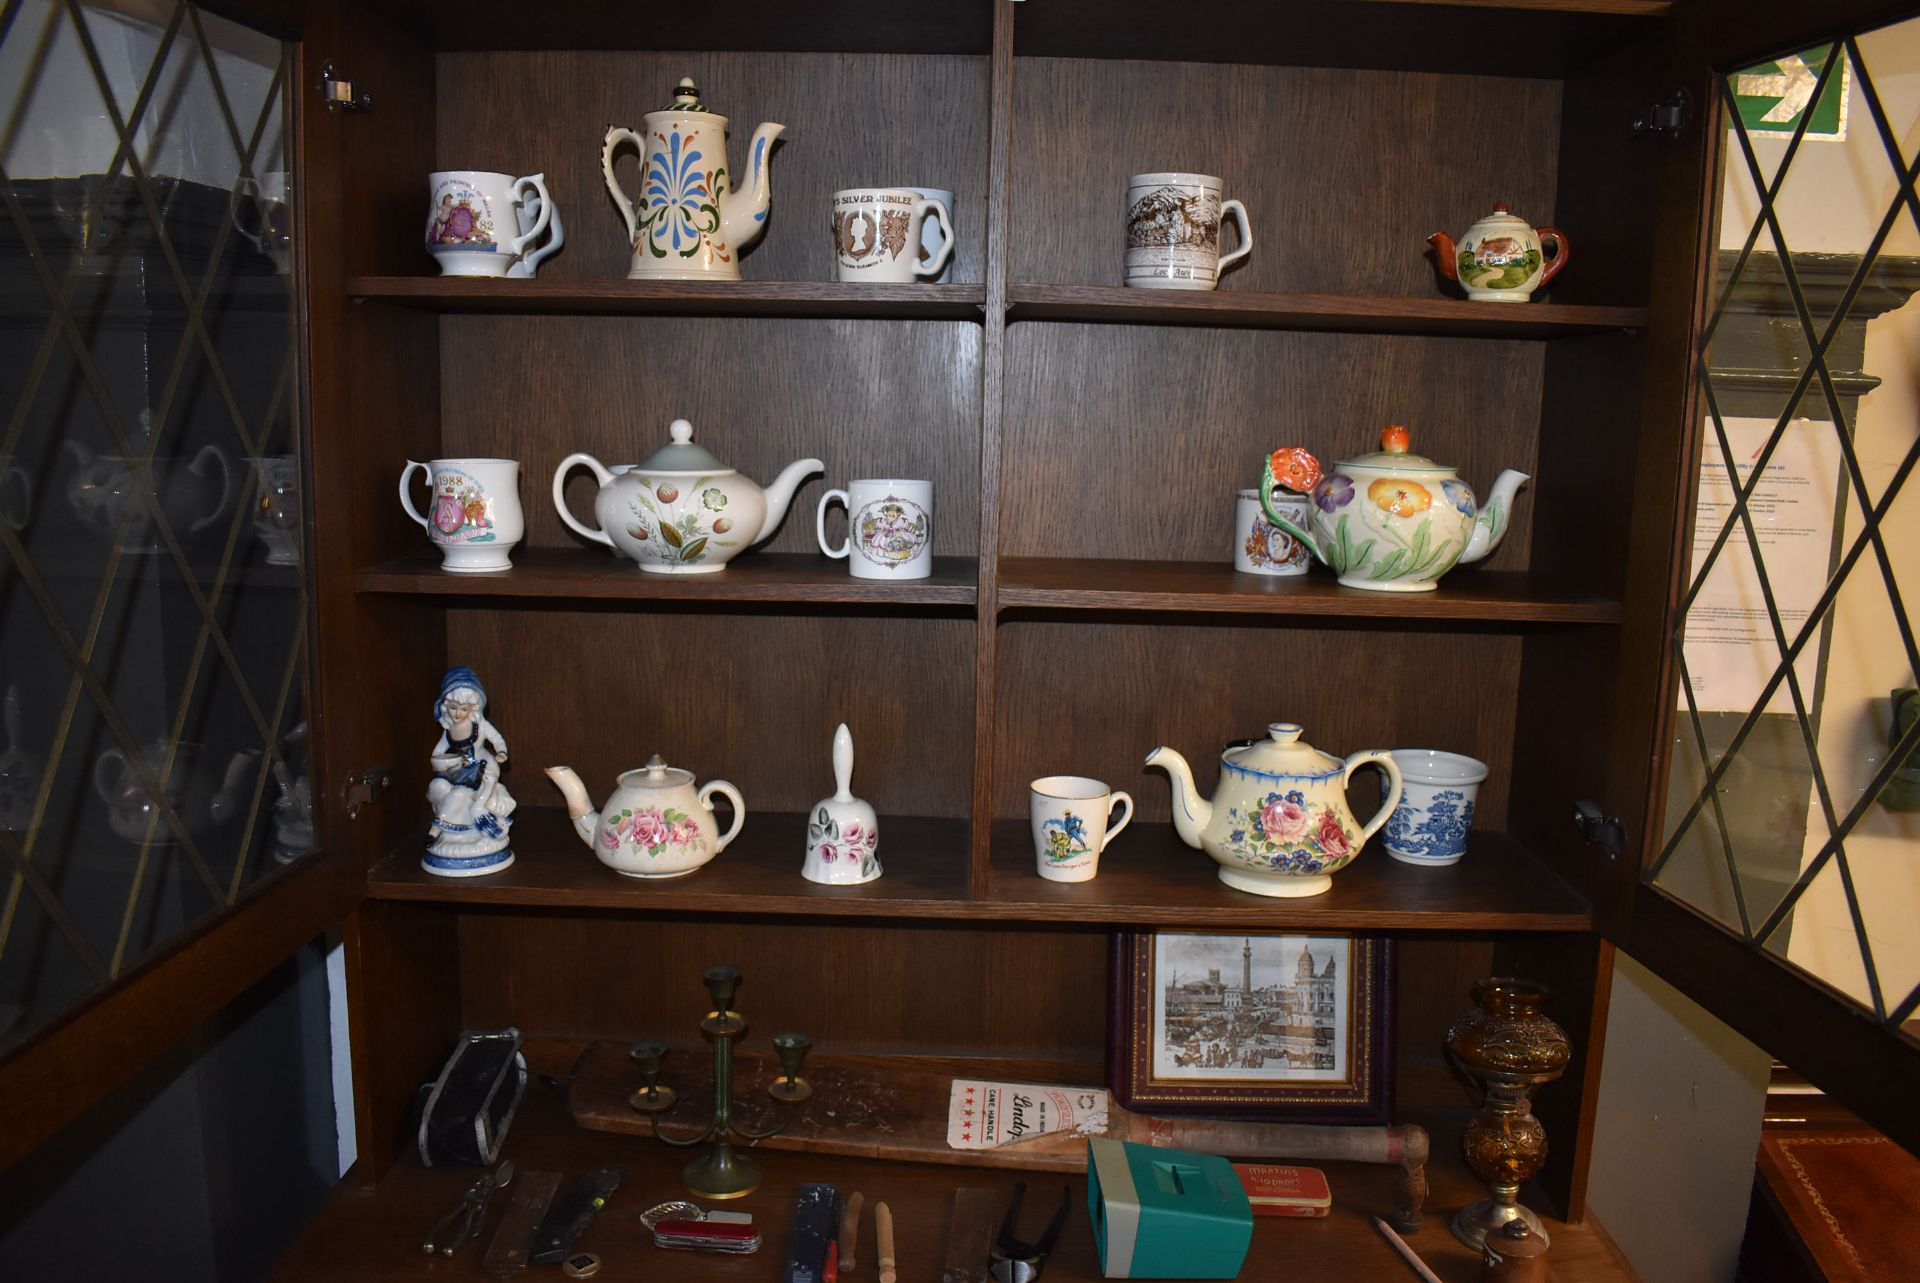 Contents of Wall Unit to Include Three Shelves of Teapots, Mugs, and Other Pottery, Old Cricket Bat,